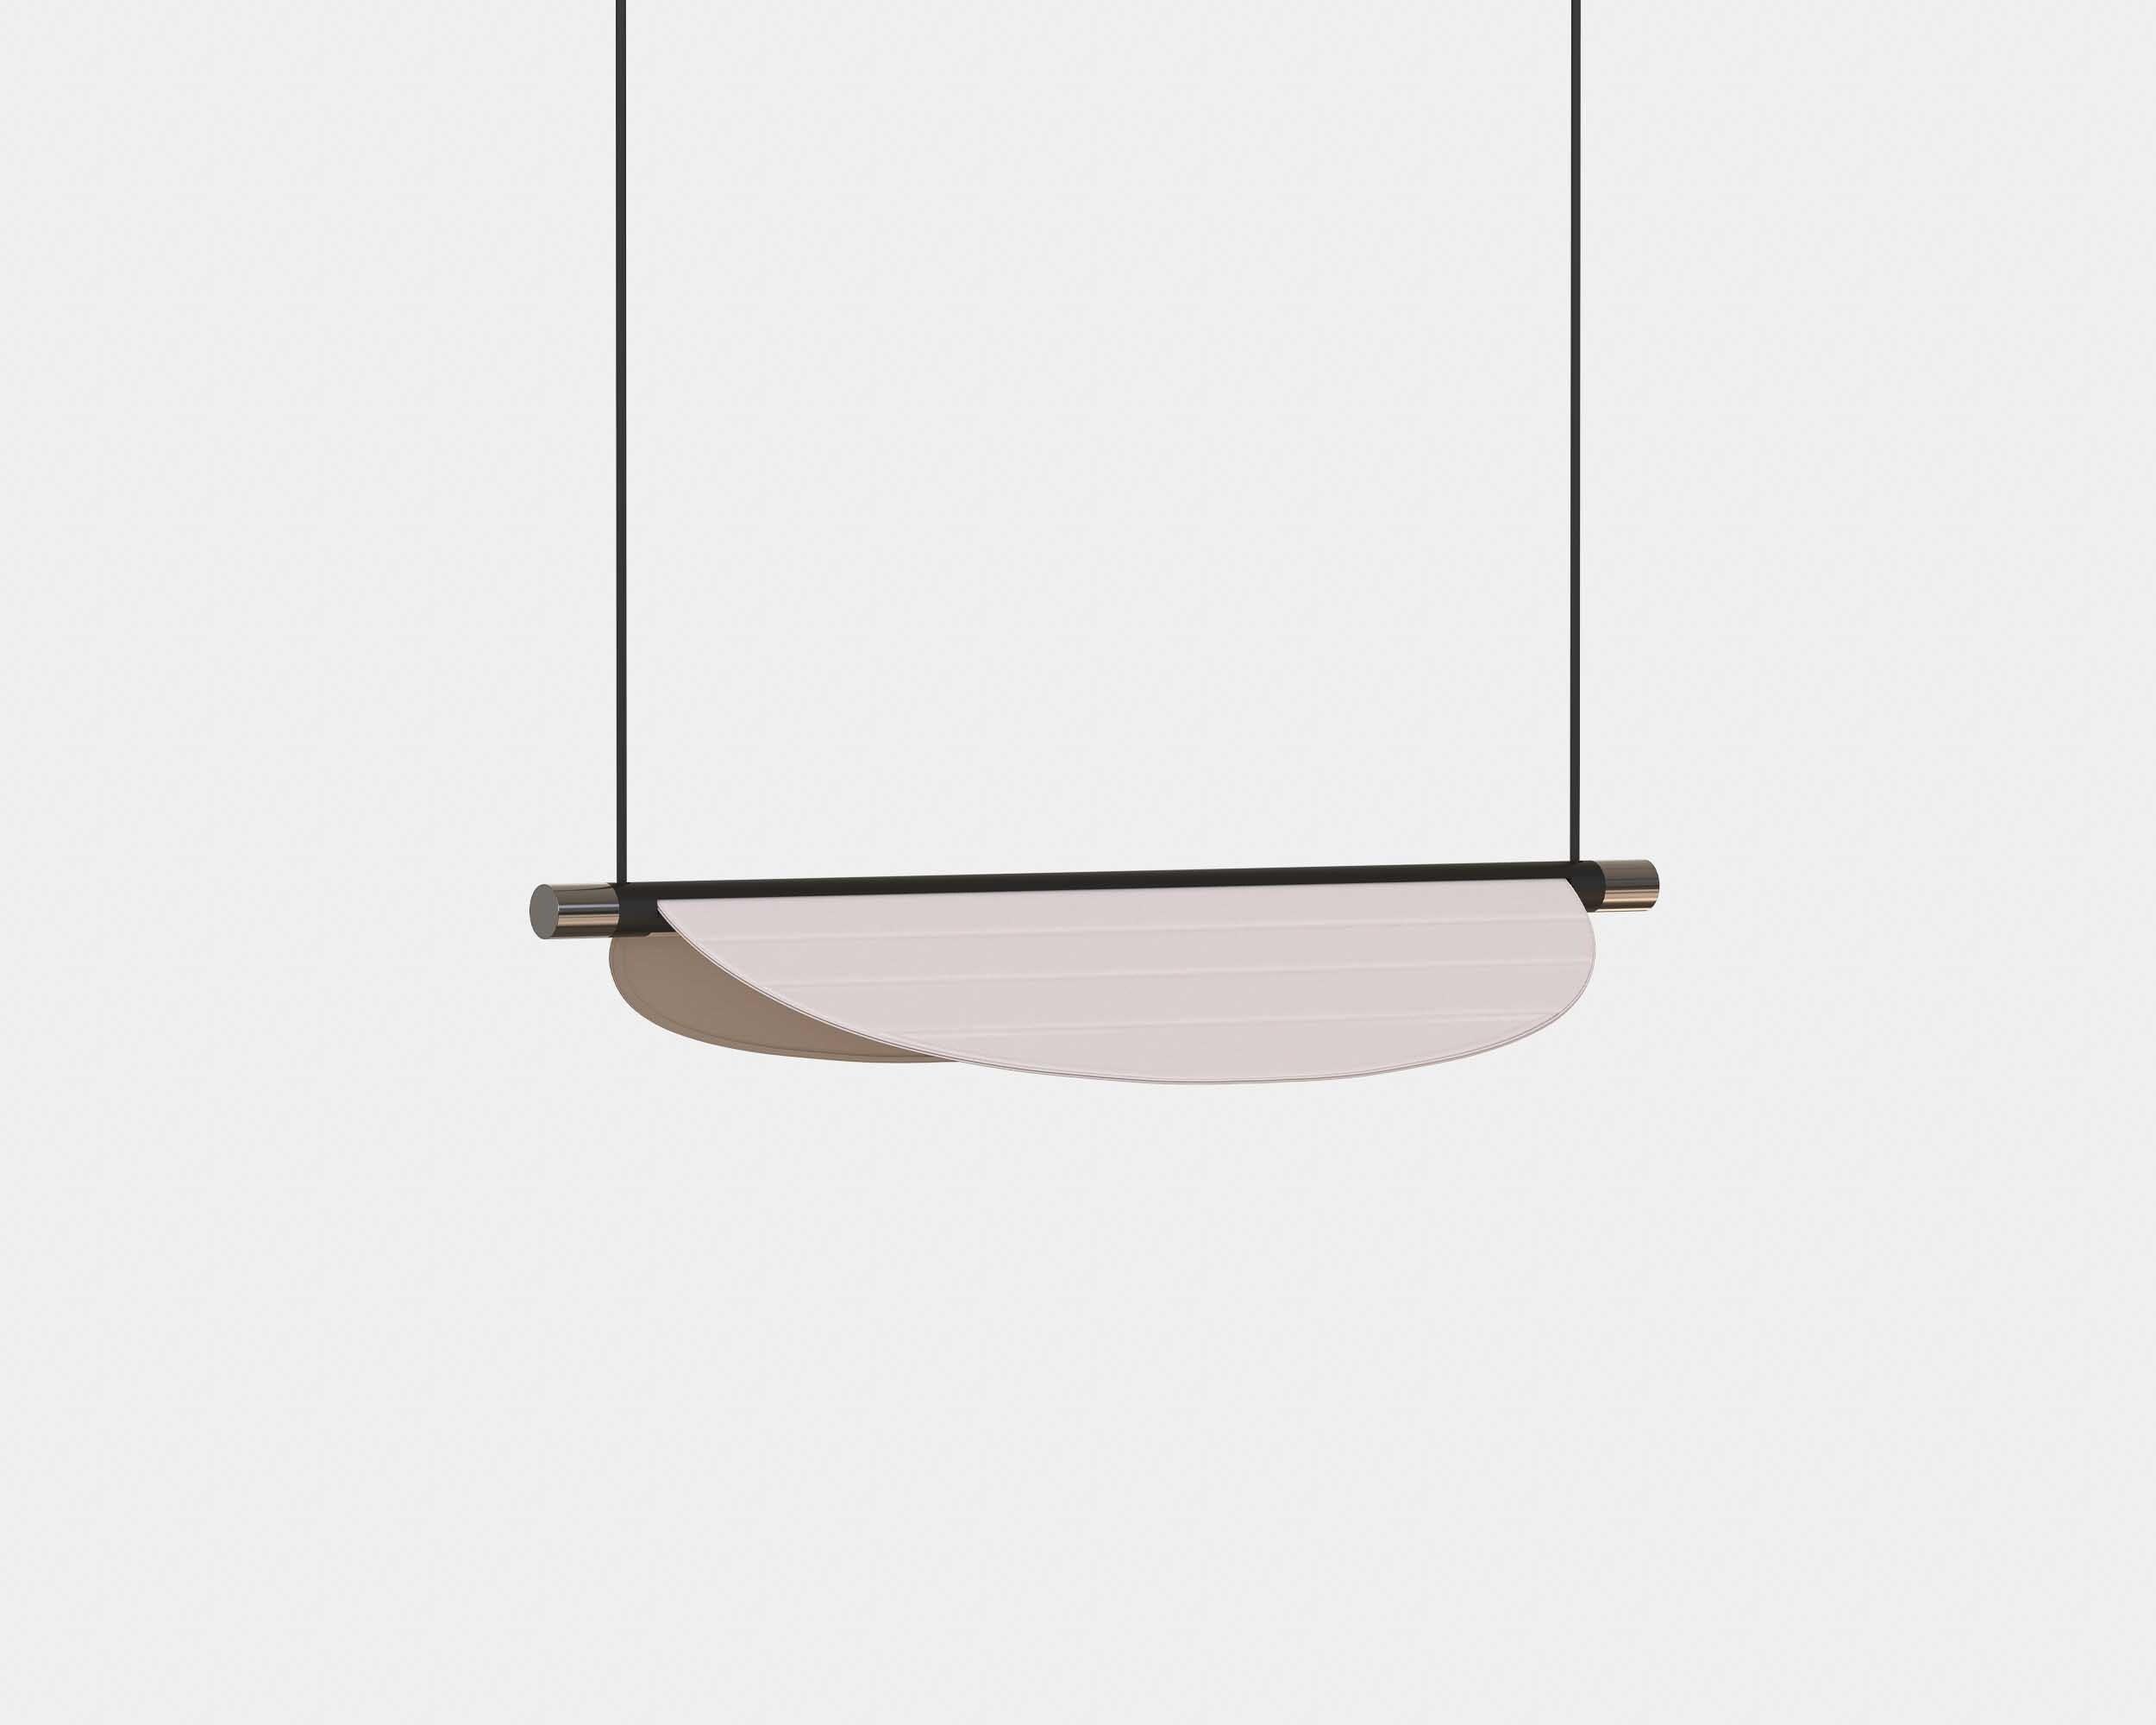 Organic Modern Modern Pendant Lamp 'Thula 562.21' by Federica Biasi x Tooy, Beige Leather For Sale